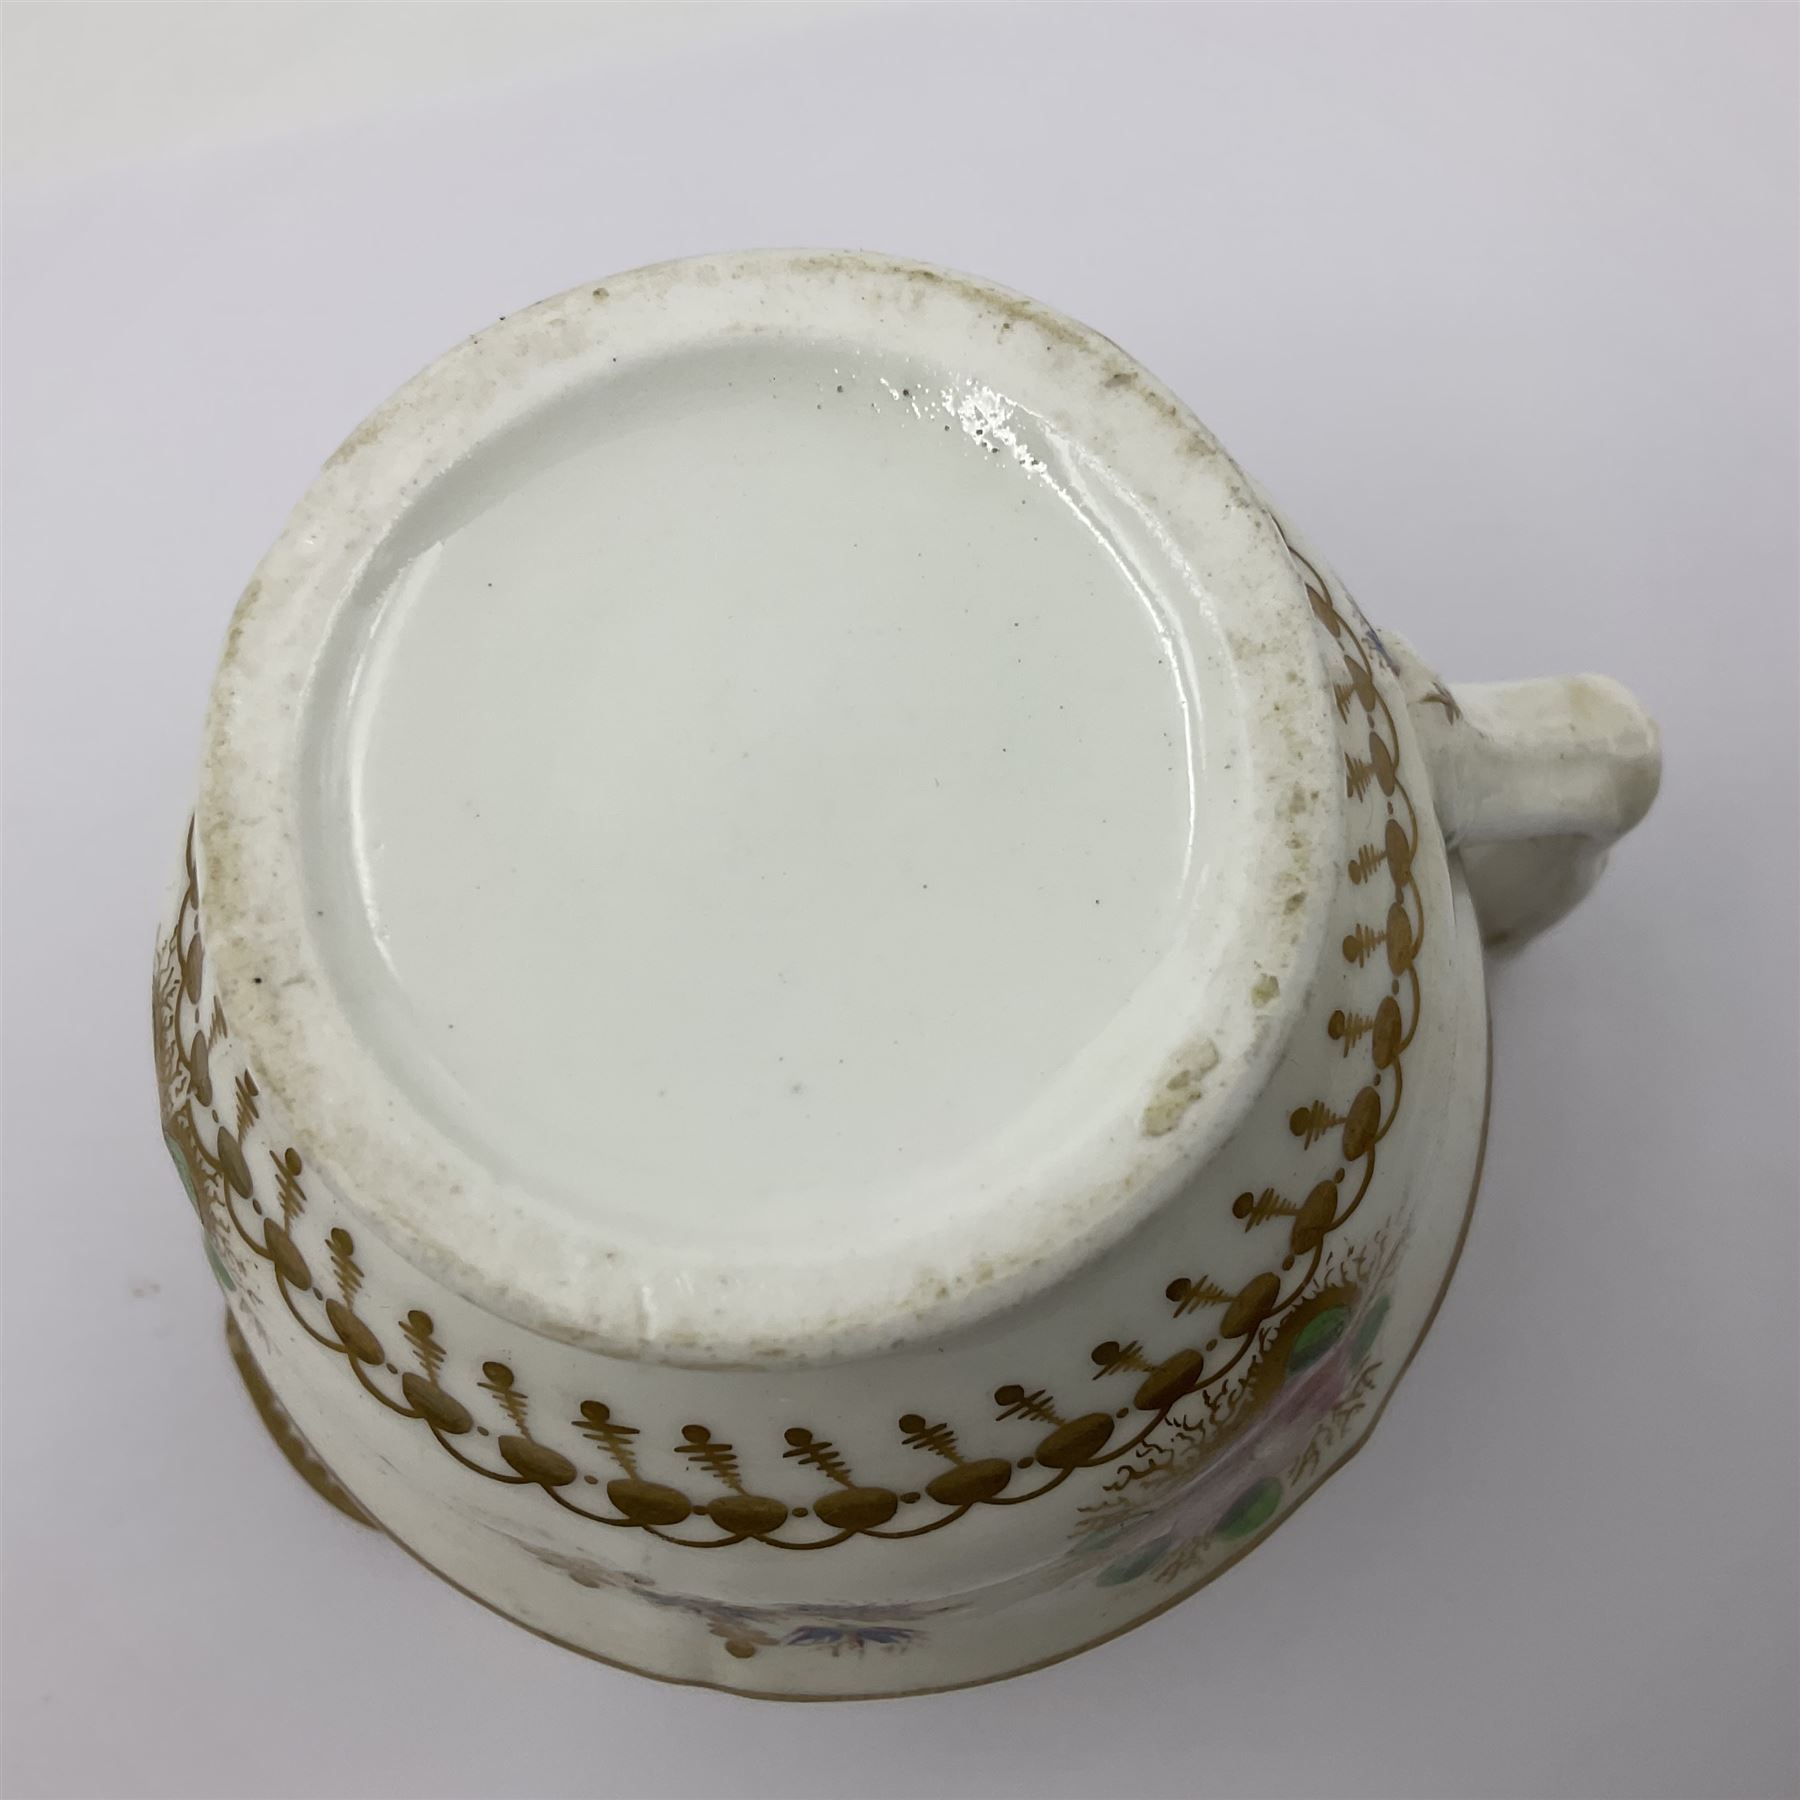 19th century Thomas Goode and Co jug - Image 22 of 22